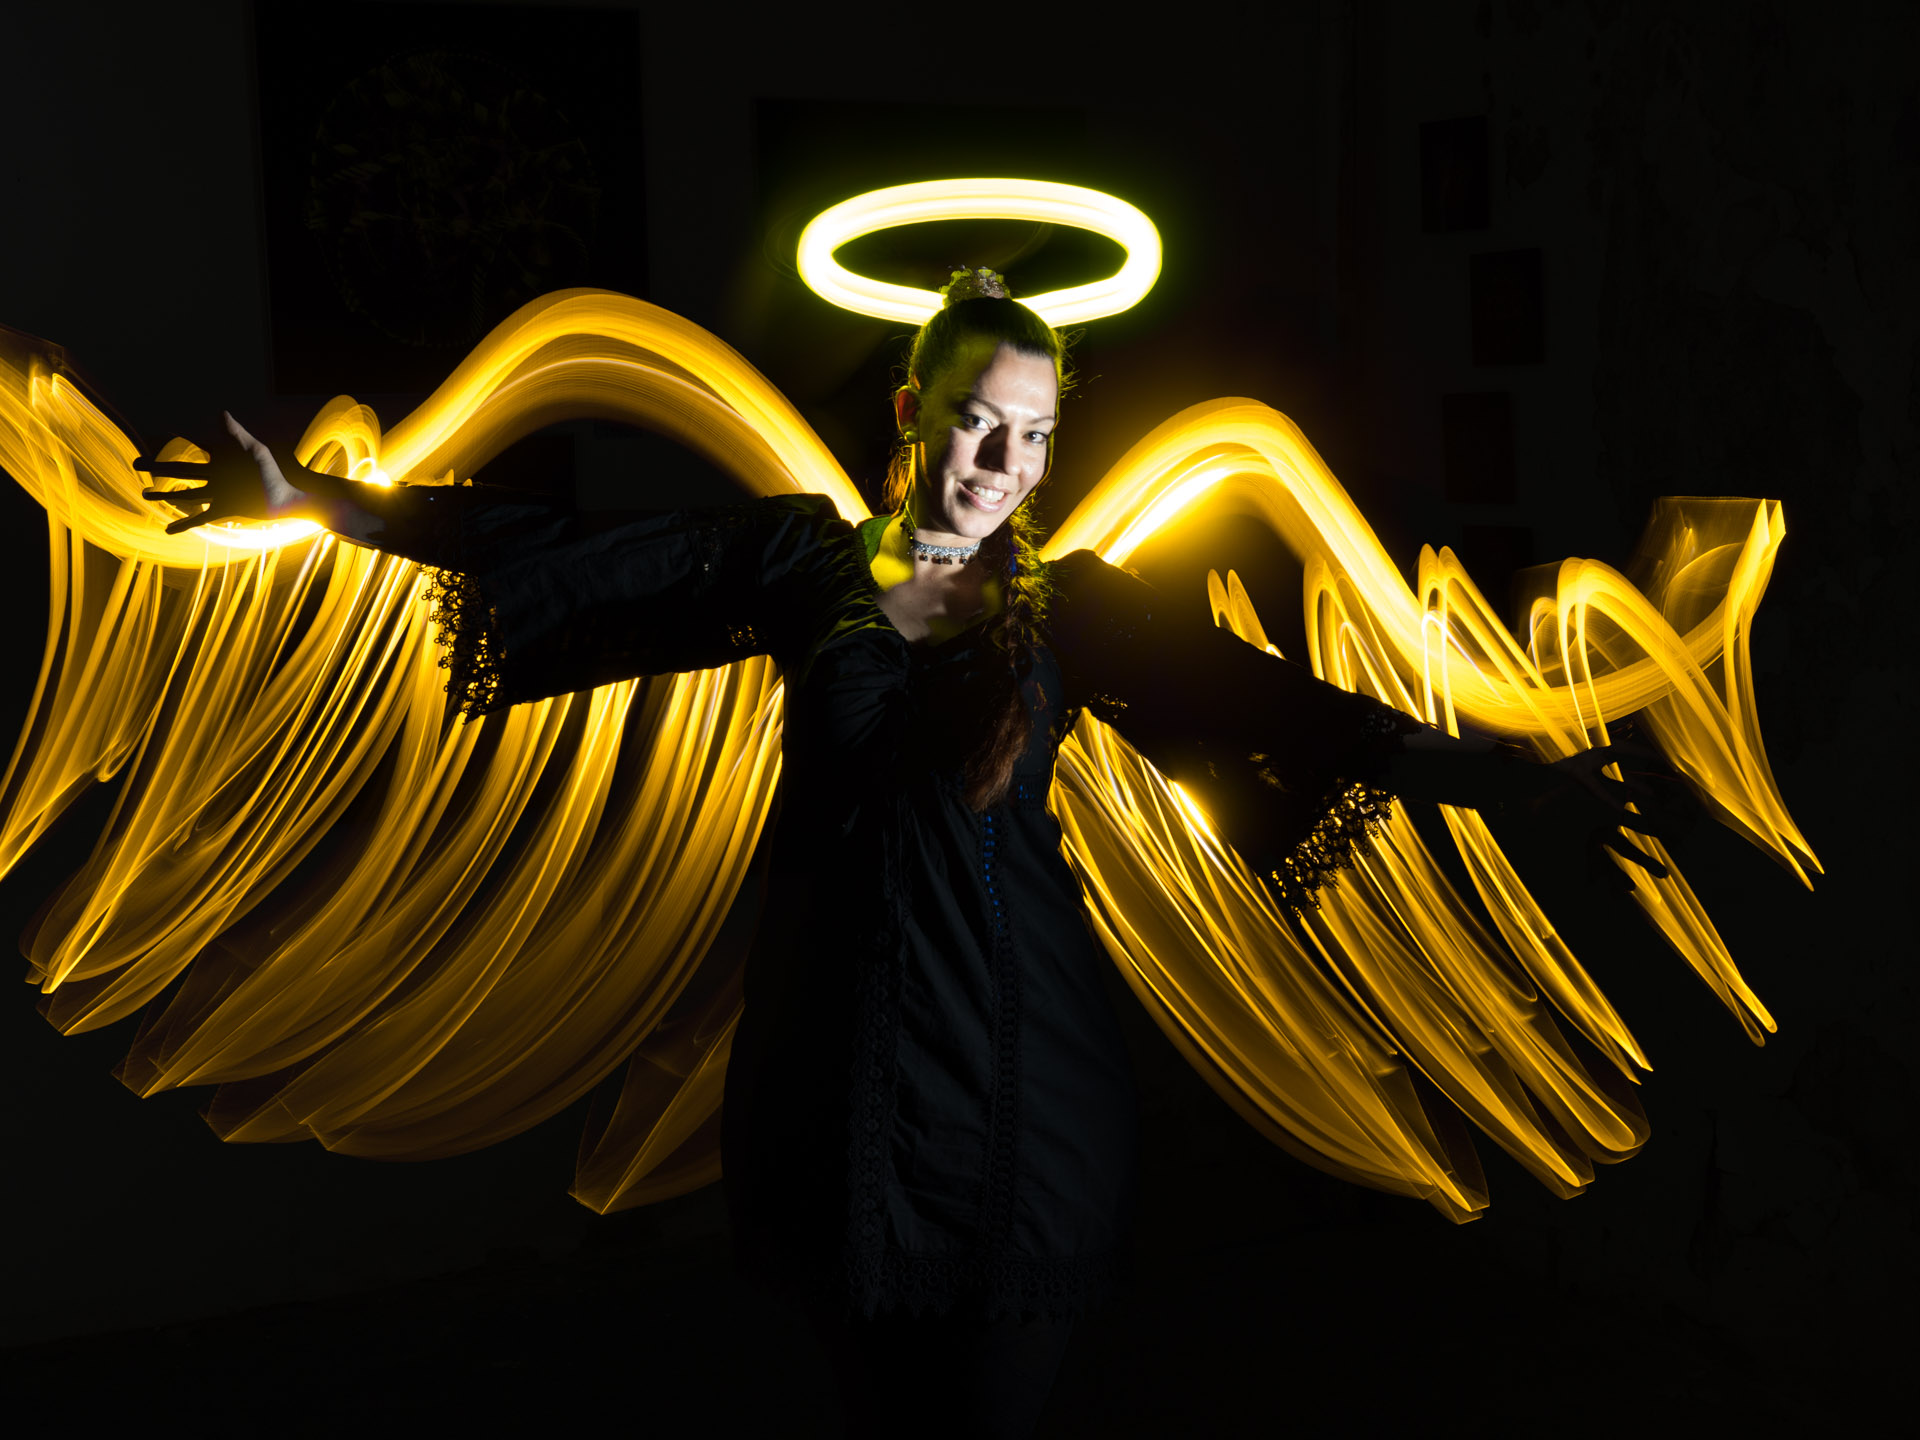 Light Painting Fotobox or photo booth by Lumenman